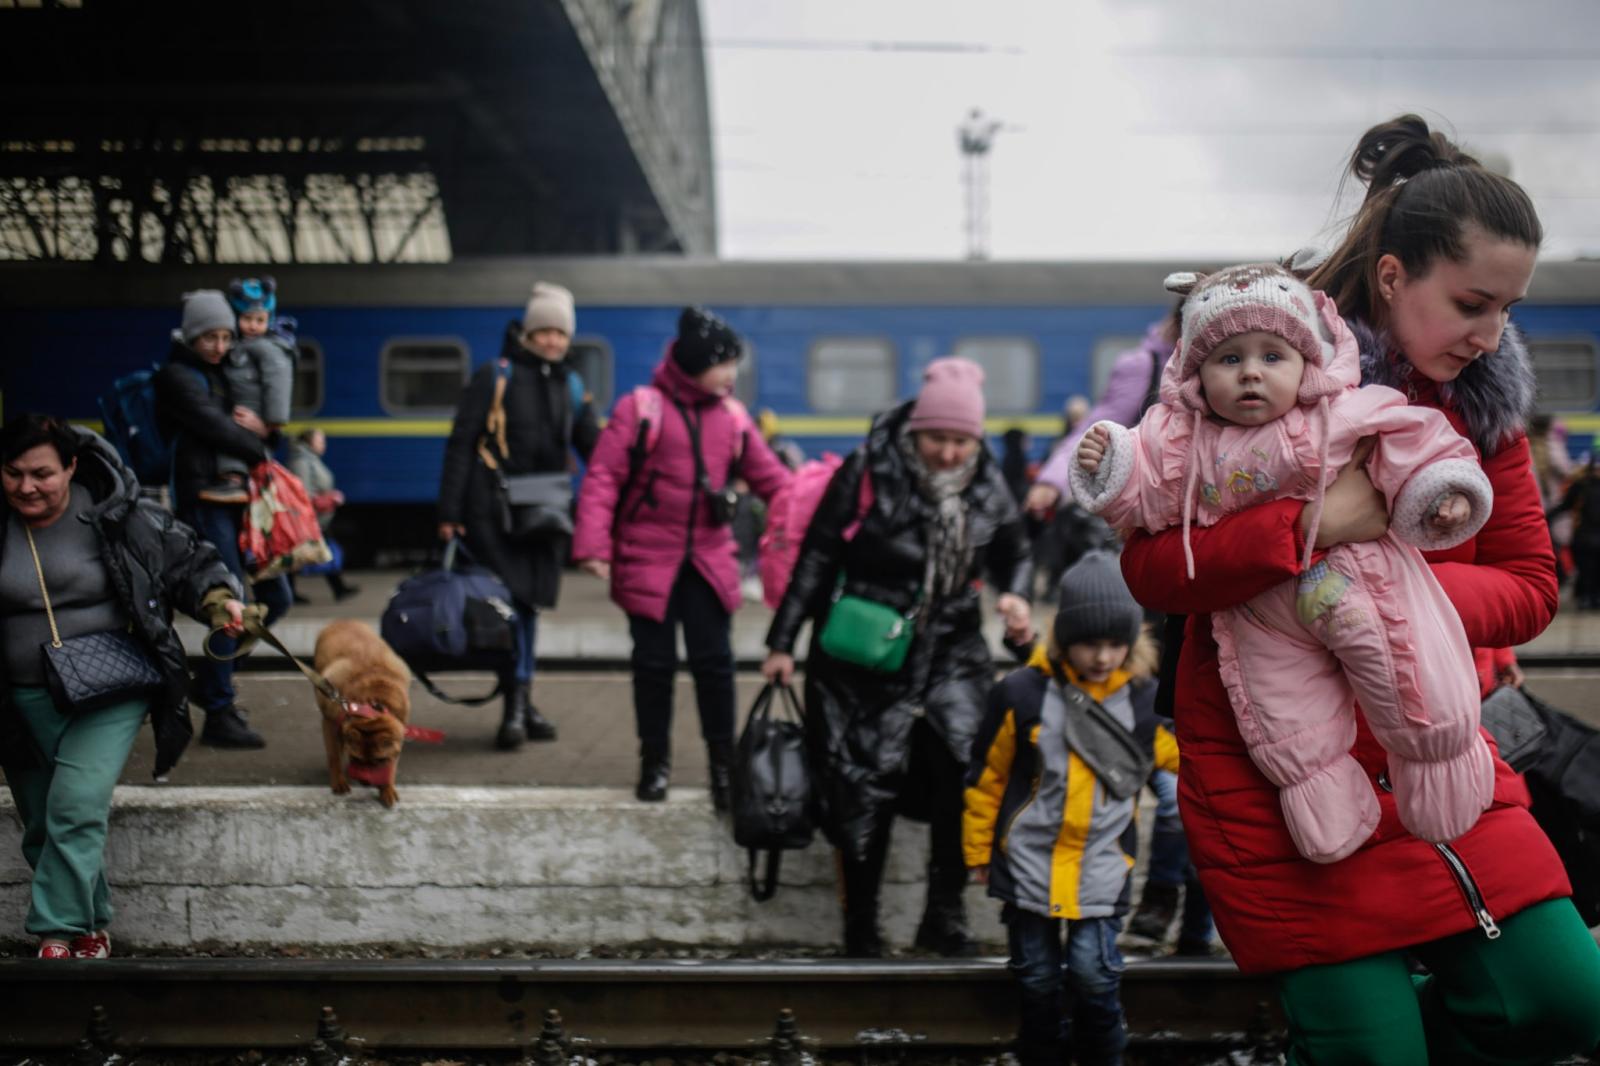 Mothers and children crossing Lviv railway lines, Ukraine. Photo by Gian Marco Benedetto 